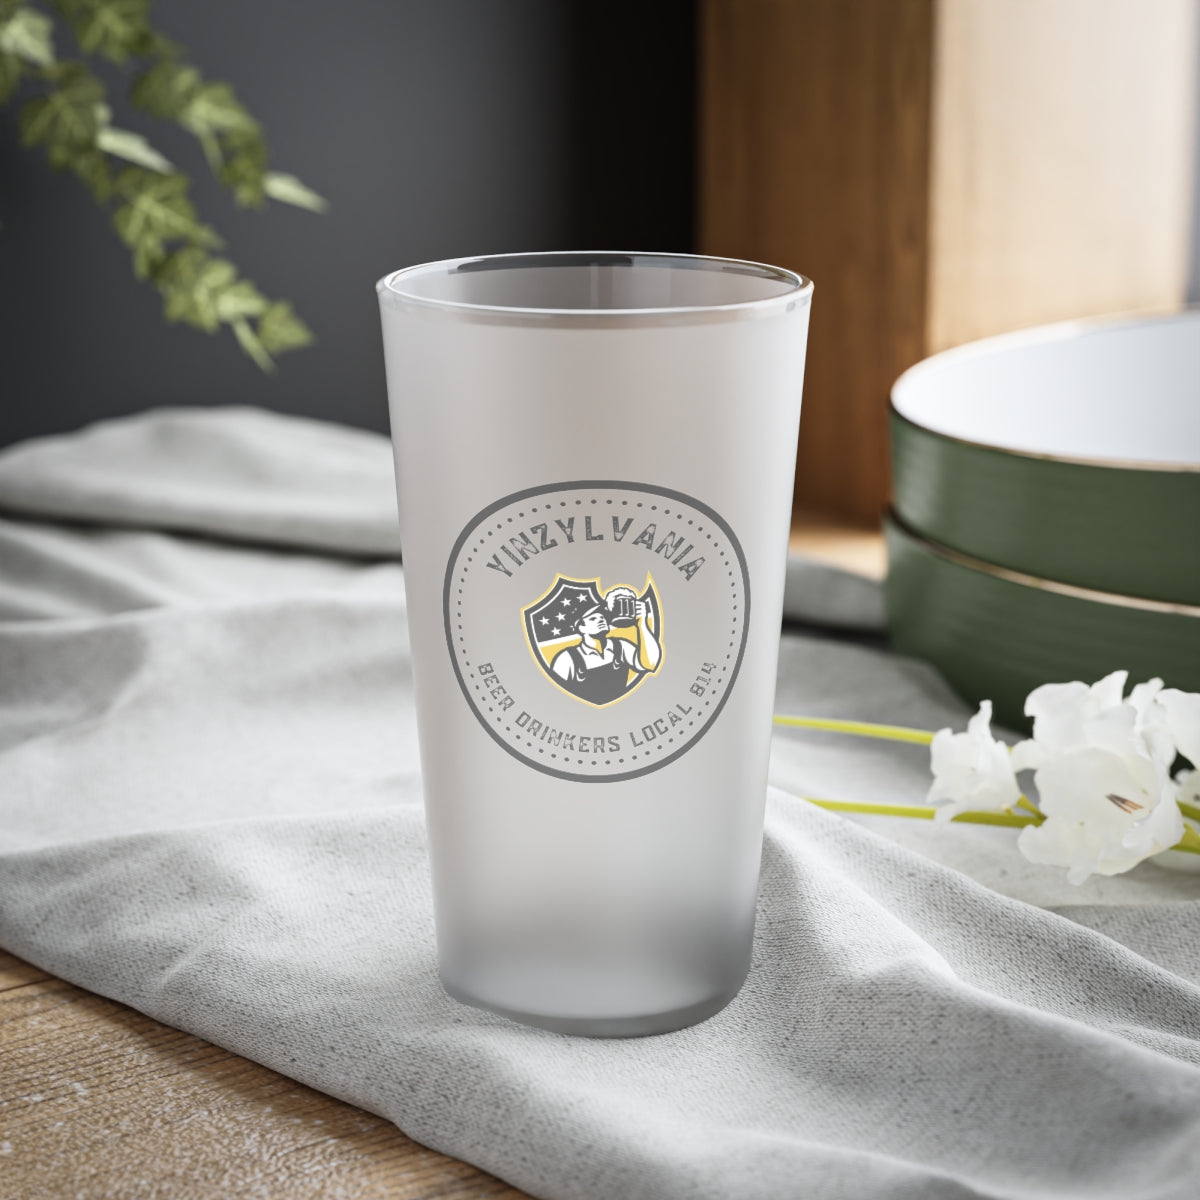 BEER DRINKERS UNION - LOCAL 814 - Frosted Pint Glass, 16oz - Yinzylvania